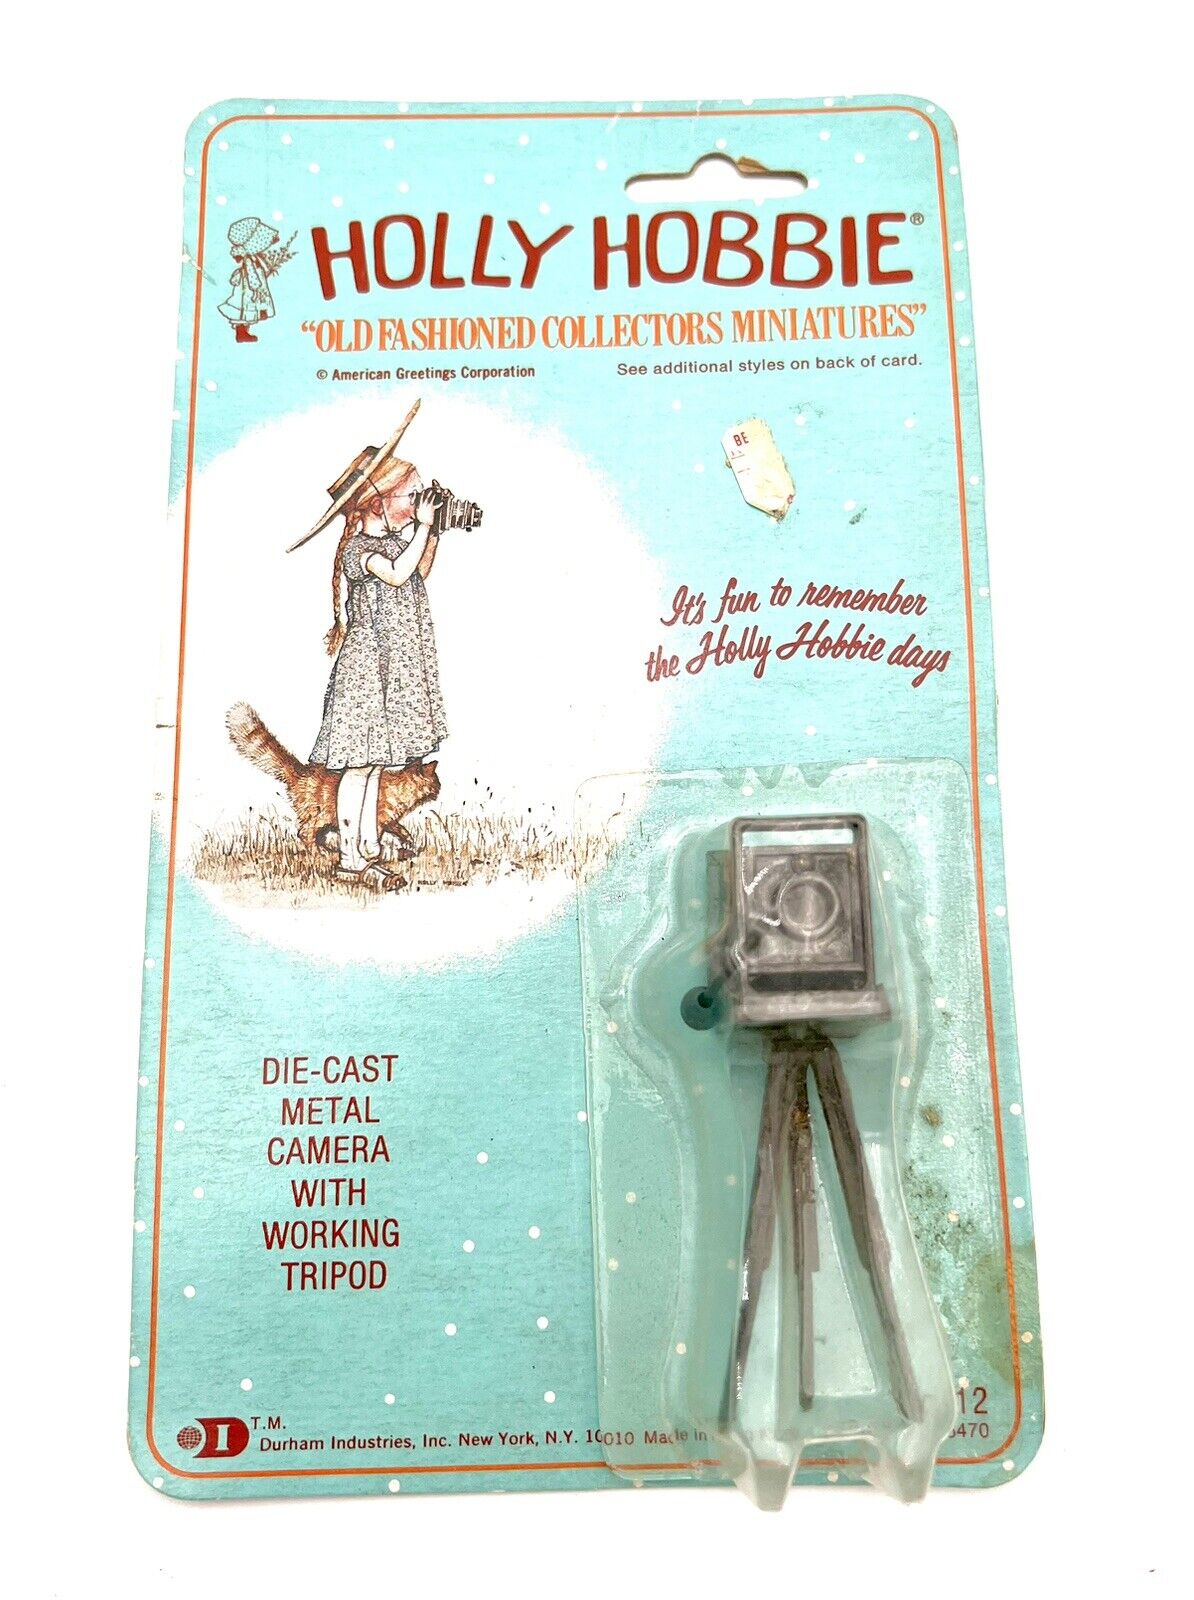 1976 Holly Hobbie Old Fashioned Diecast Metal Miniatures No. 12 Camera